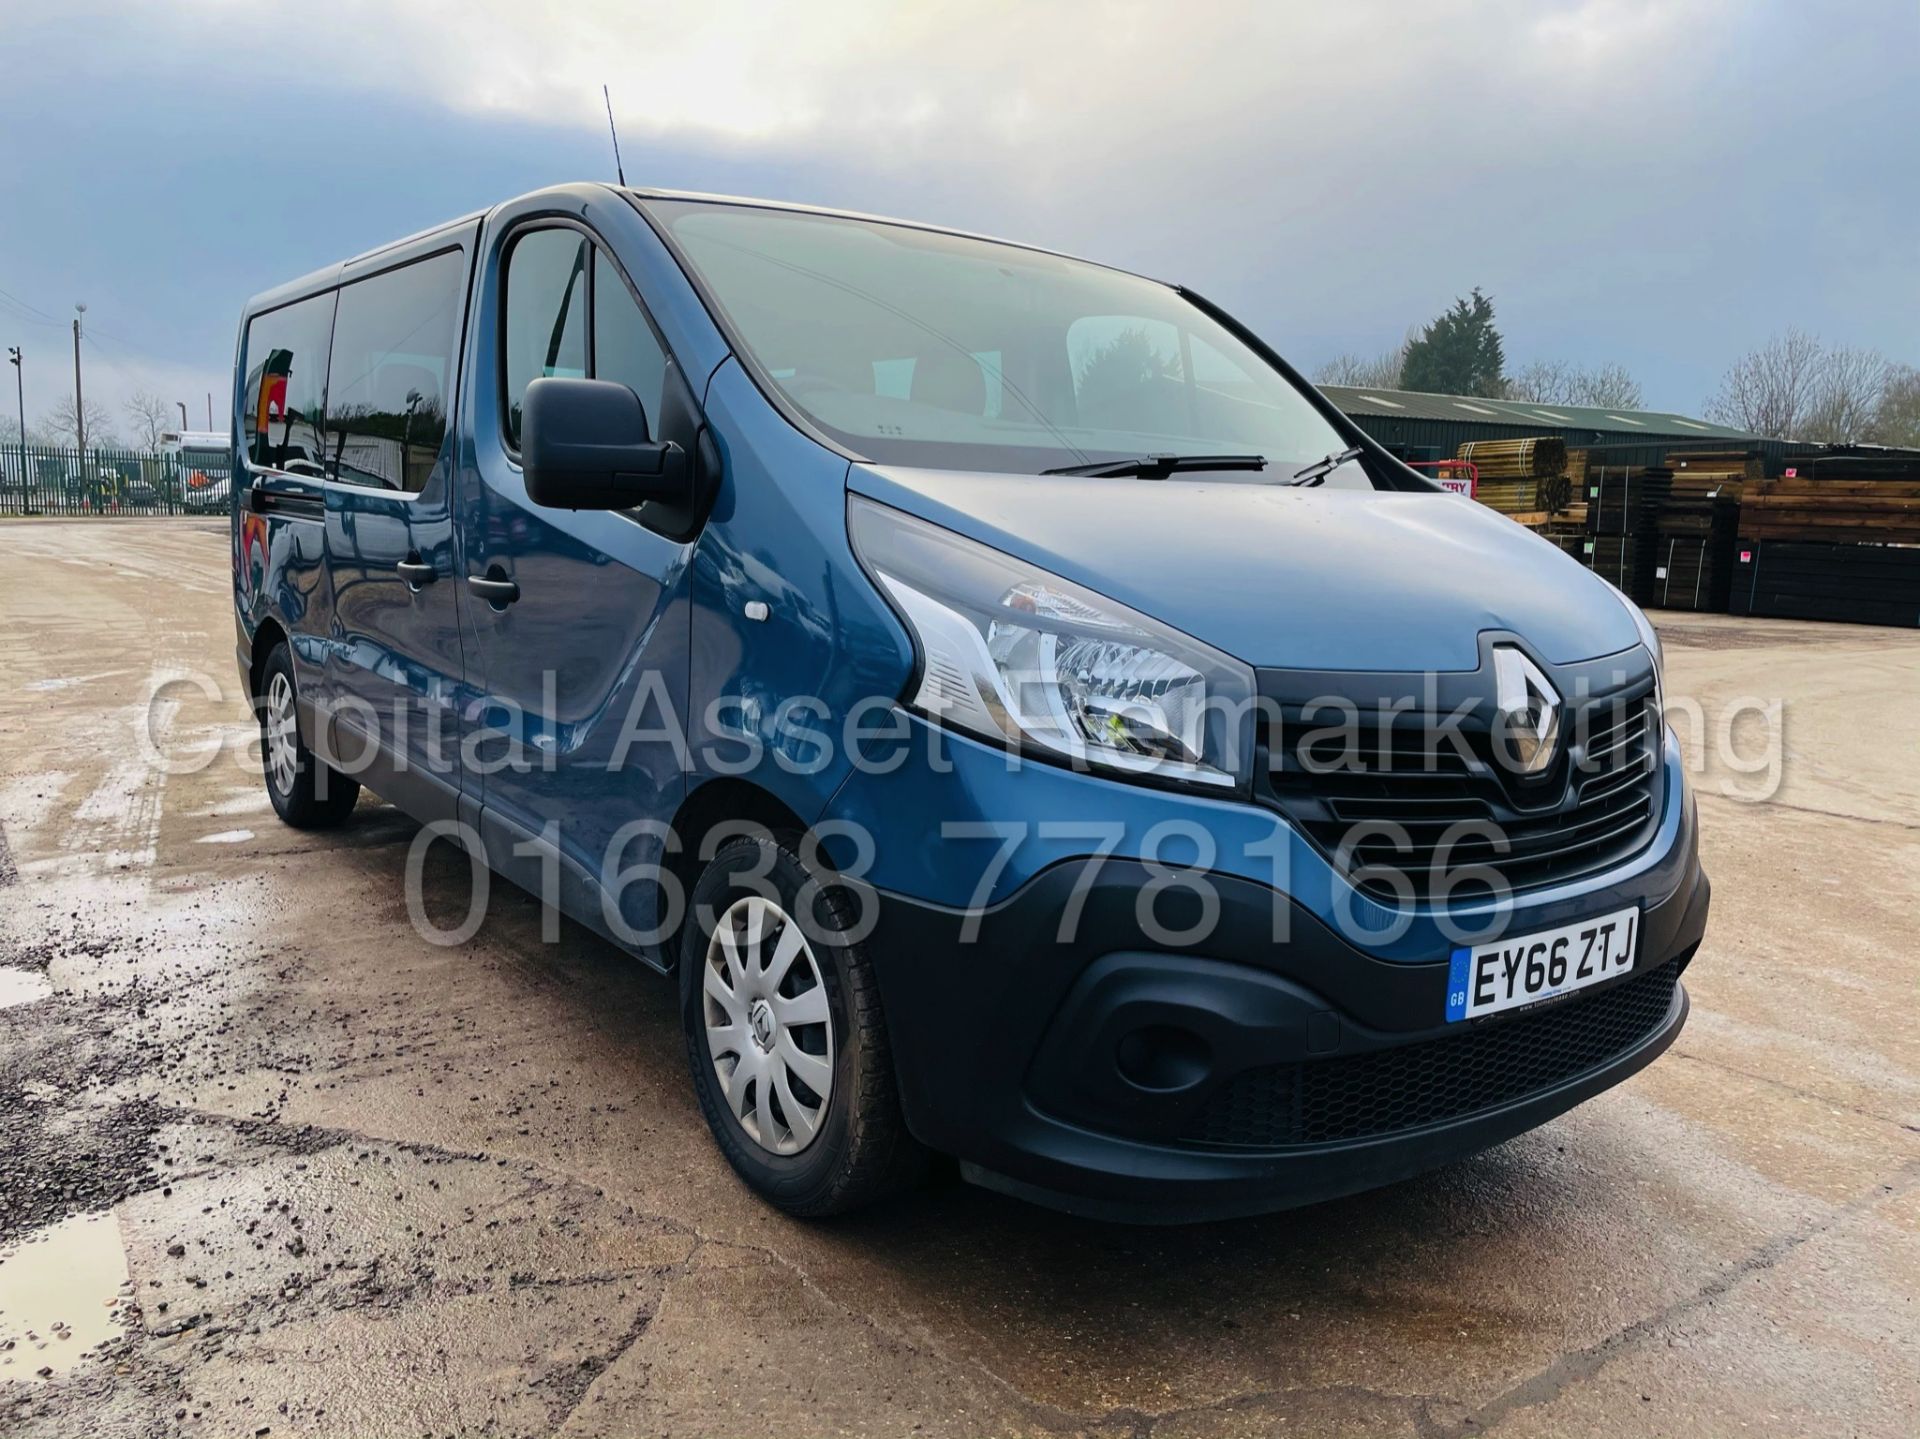 RENAULT TRAFIC *LWB - 9 SEATER MPV / BUS* (2017 - EURO 6) '1.6 DCI - 6 SPEED' *AIR CON* (NO VAT) - Image 13 of 47